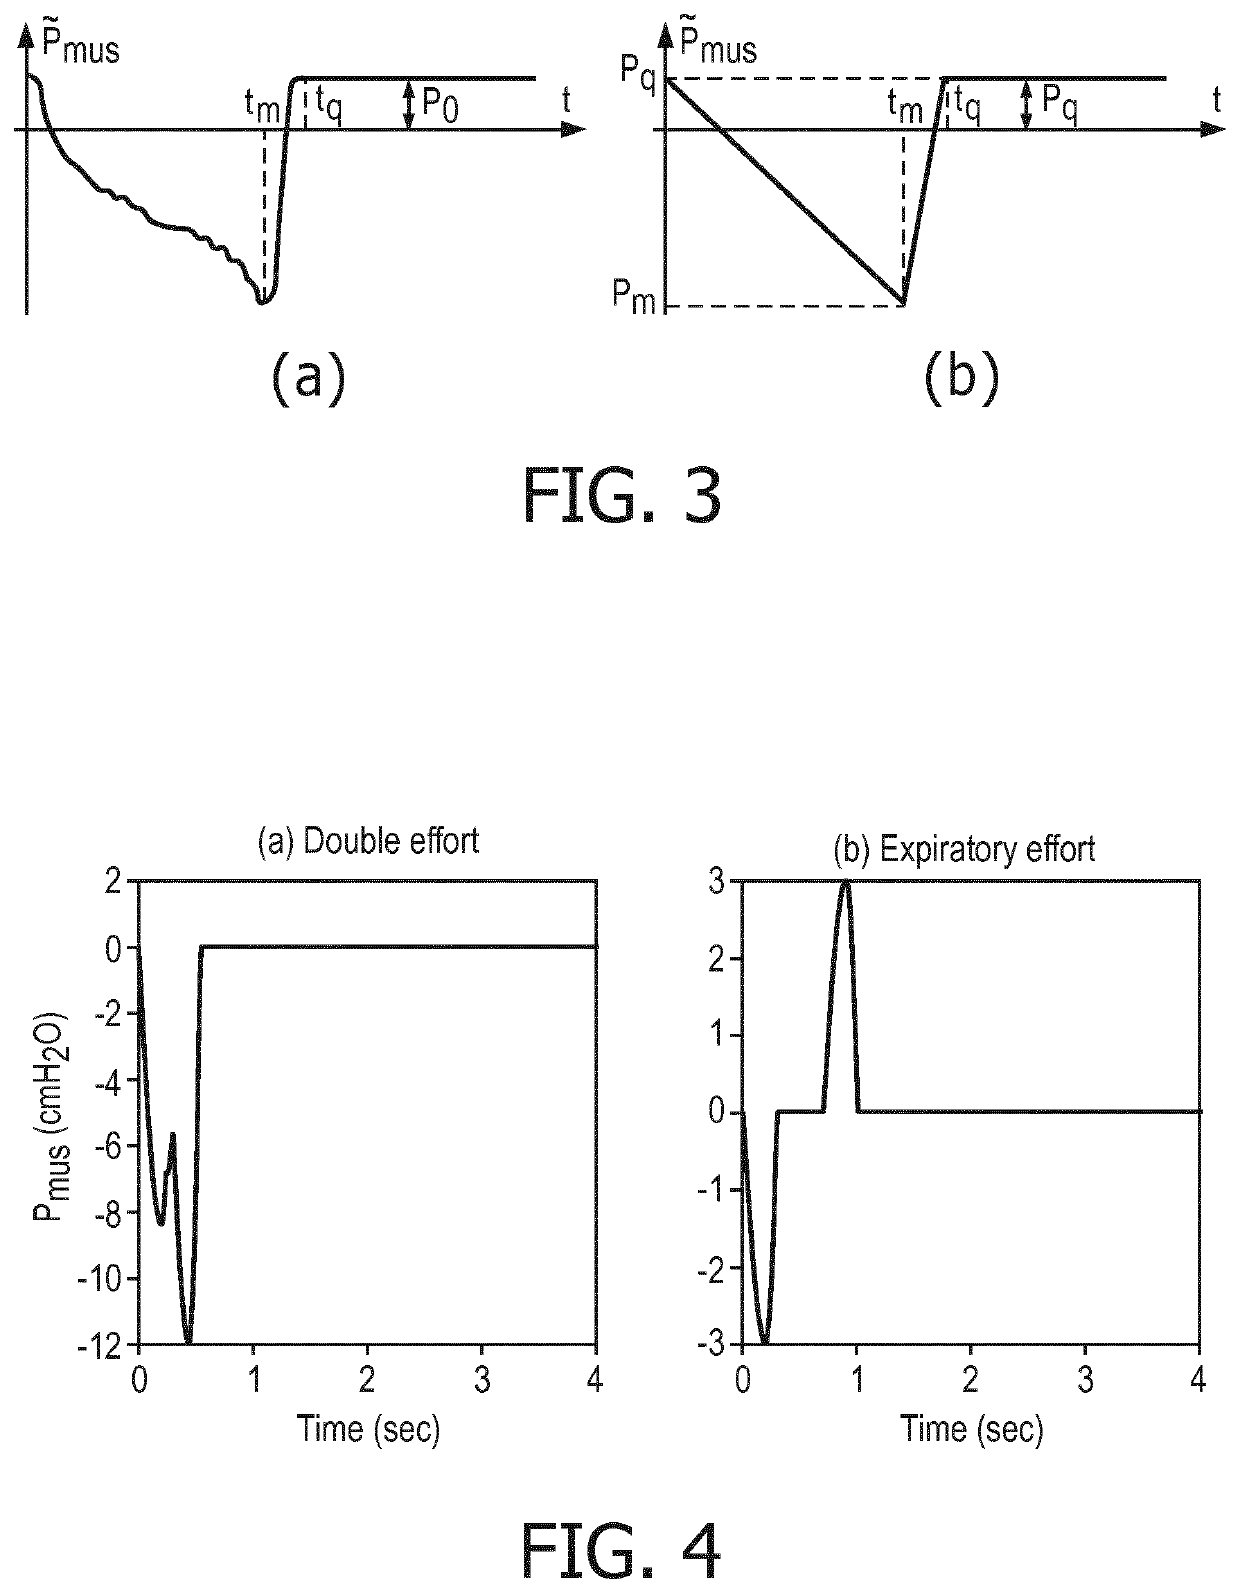 Enhancement of respiratory parameter estimation and asynchrony detection algorithms via the use of central venous pressure manometry